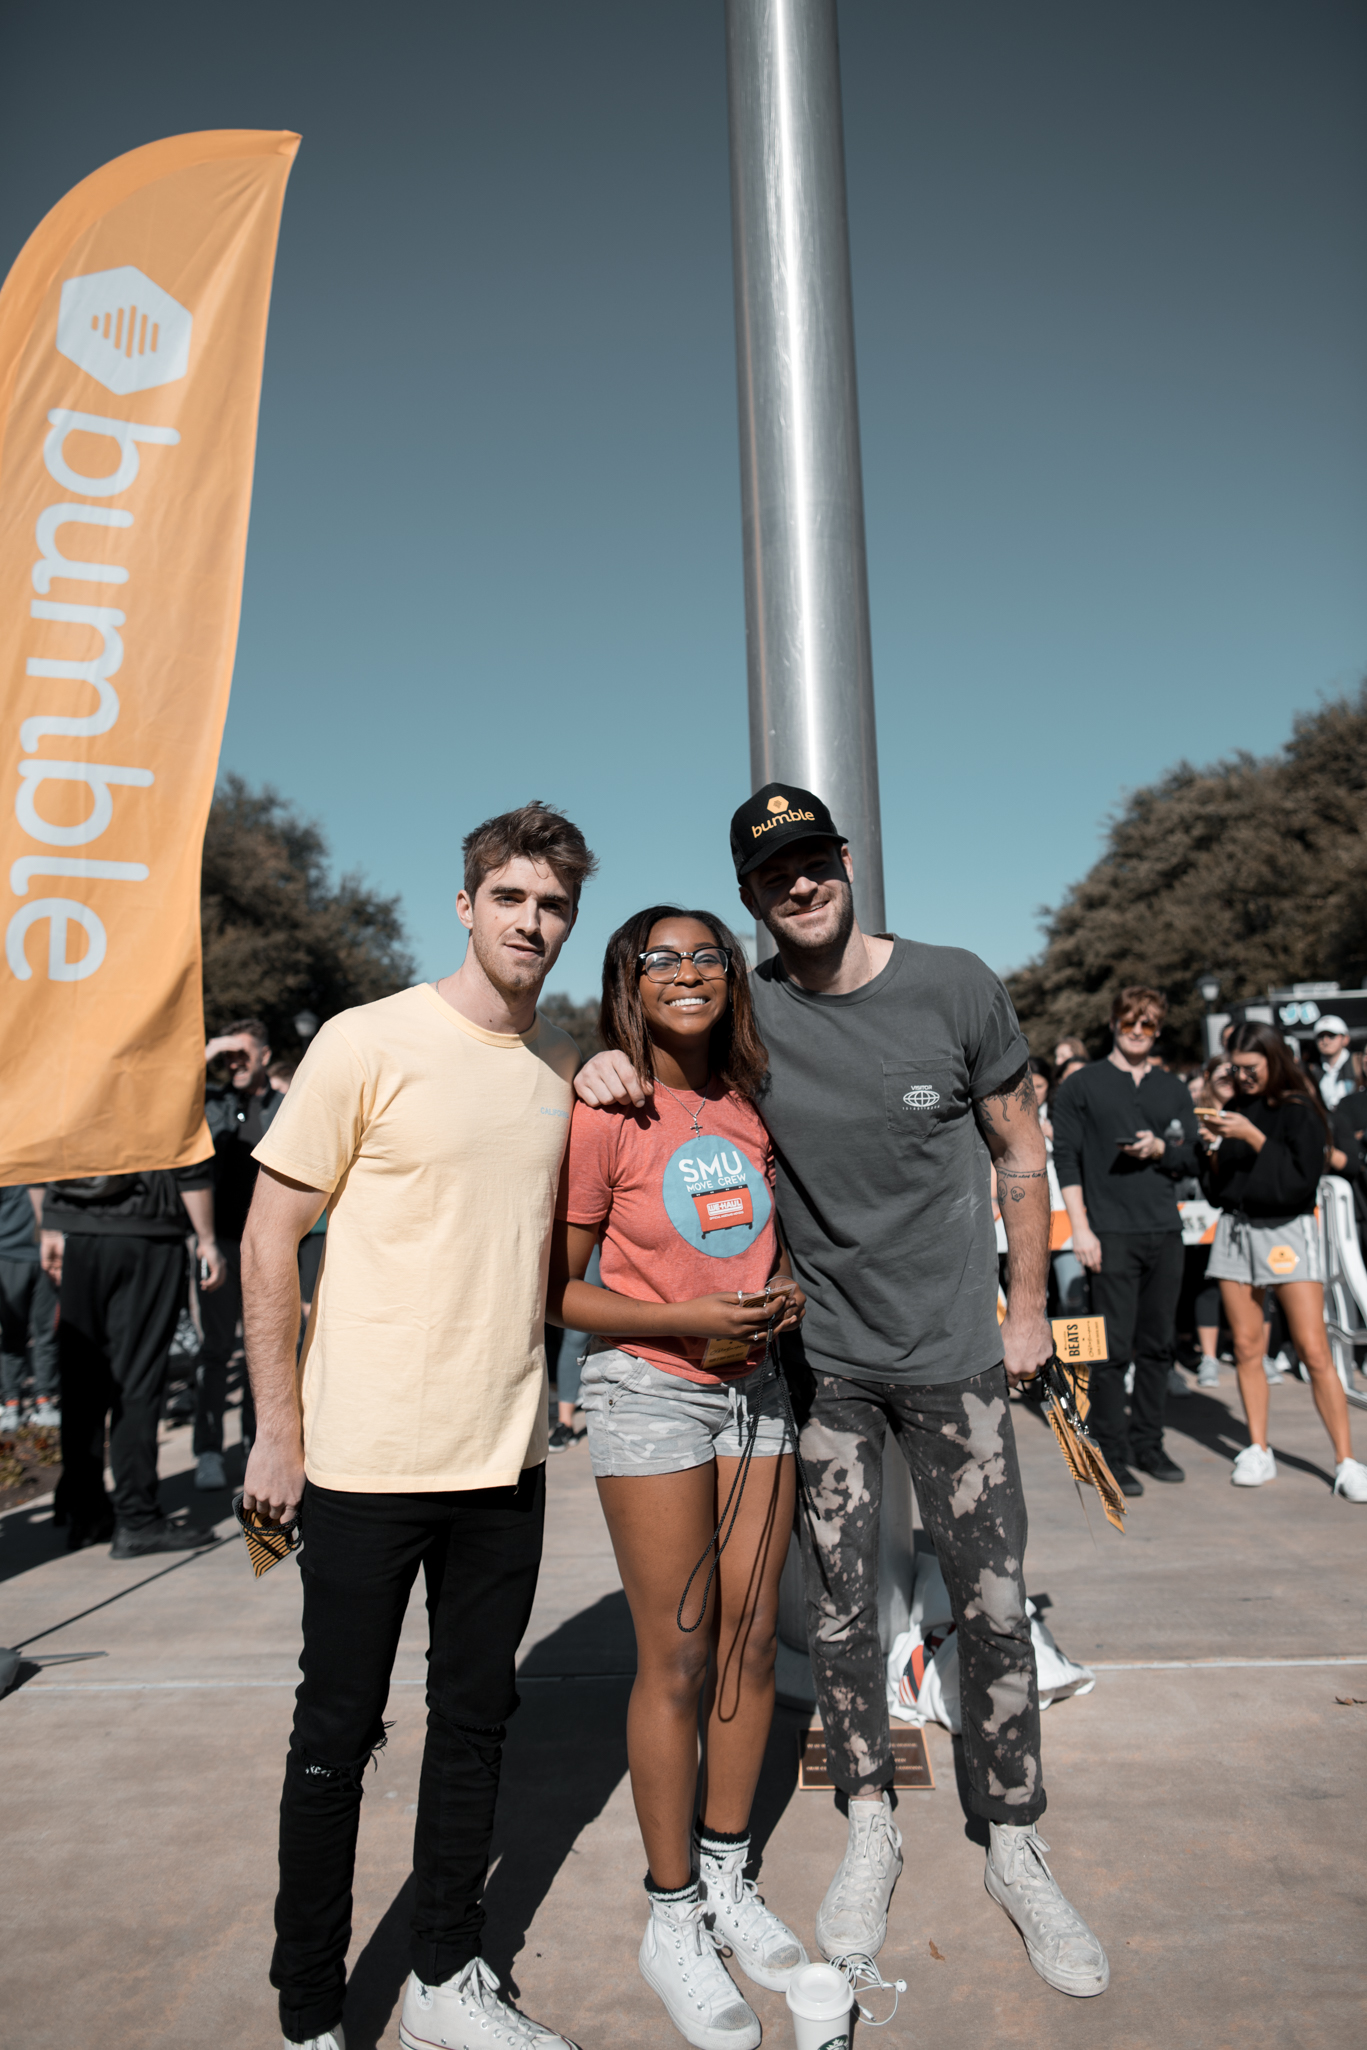 Chainsmokers x Bumble 3-5-small.jpg